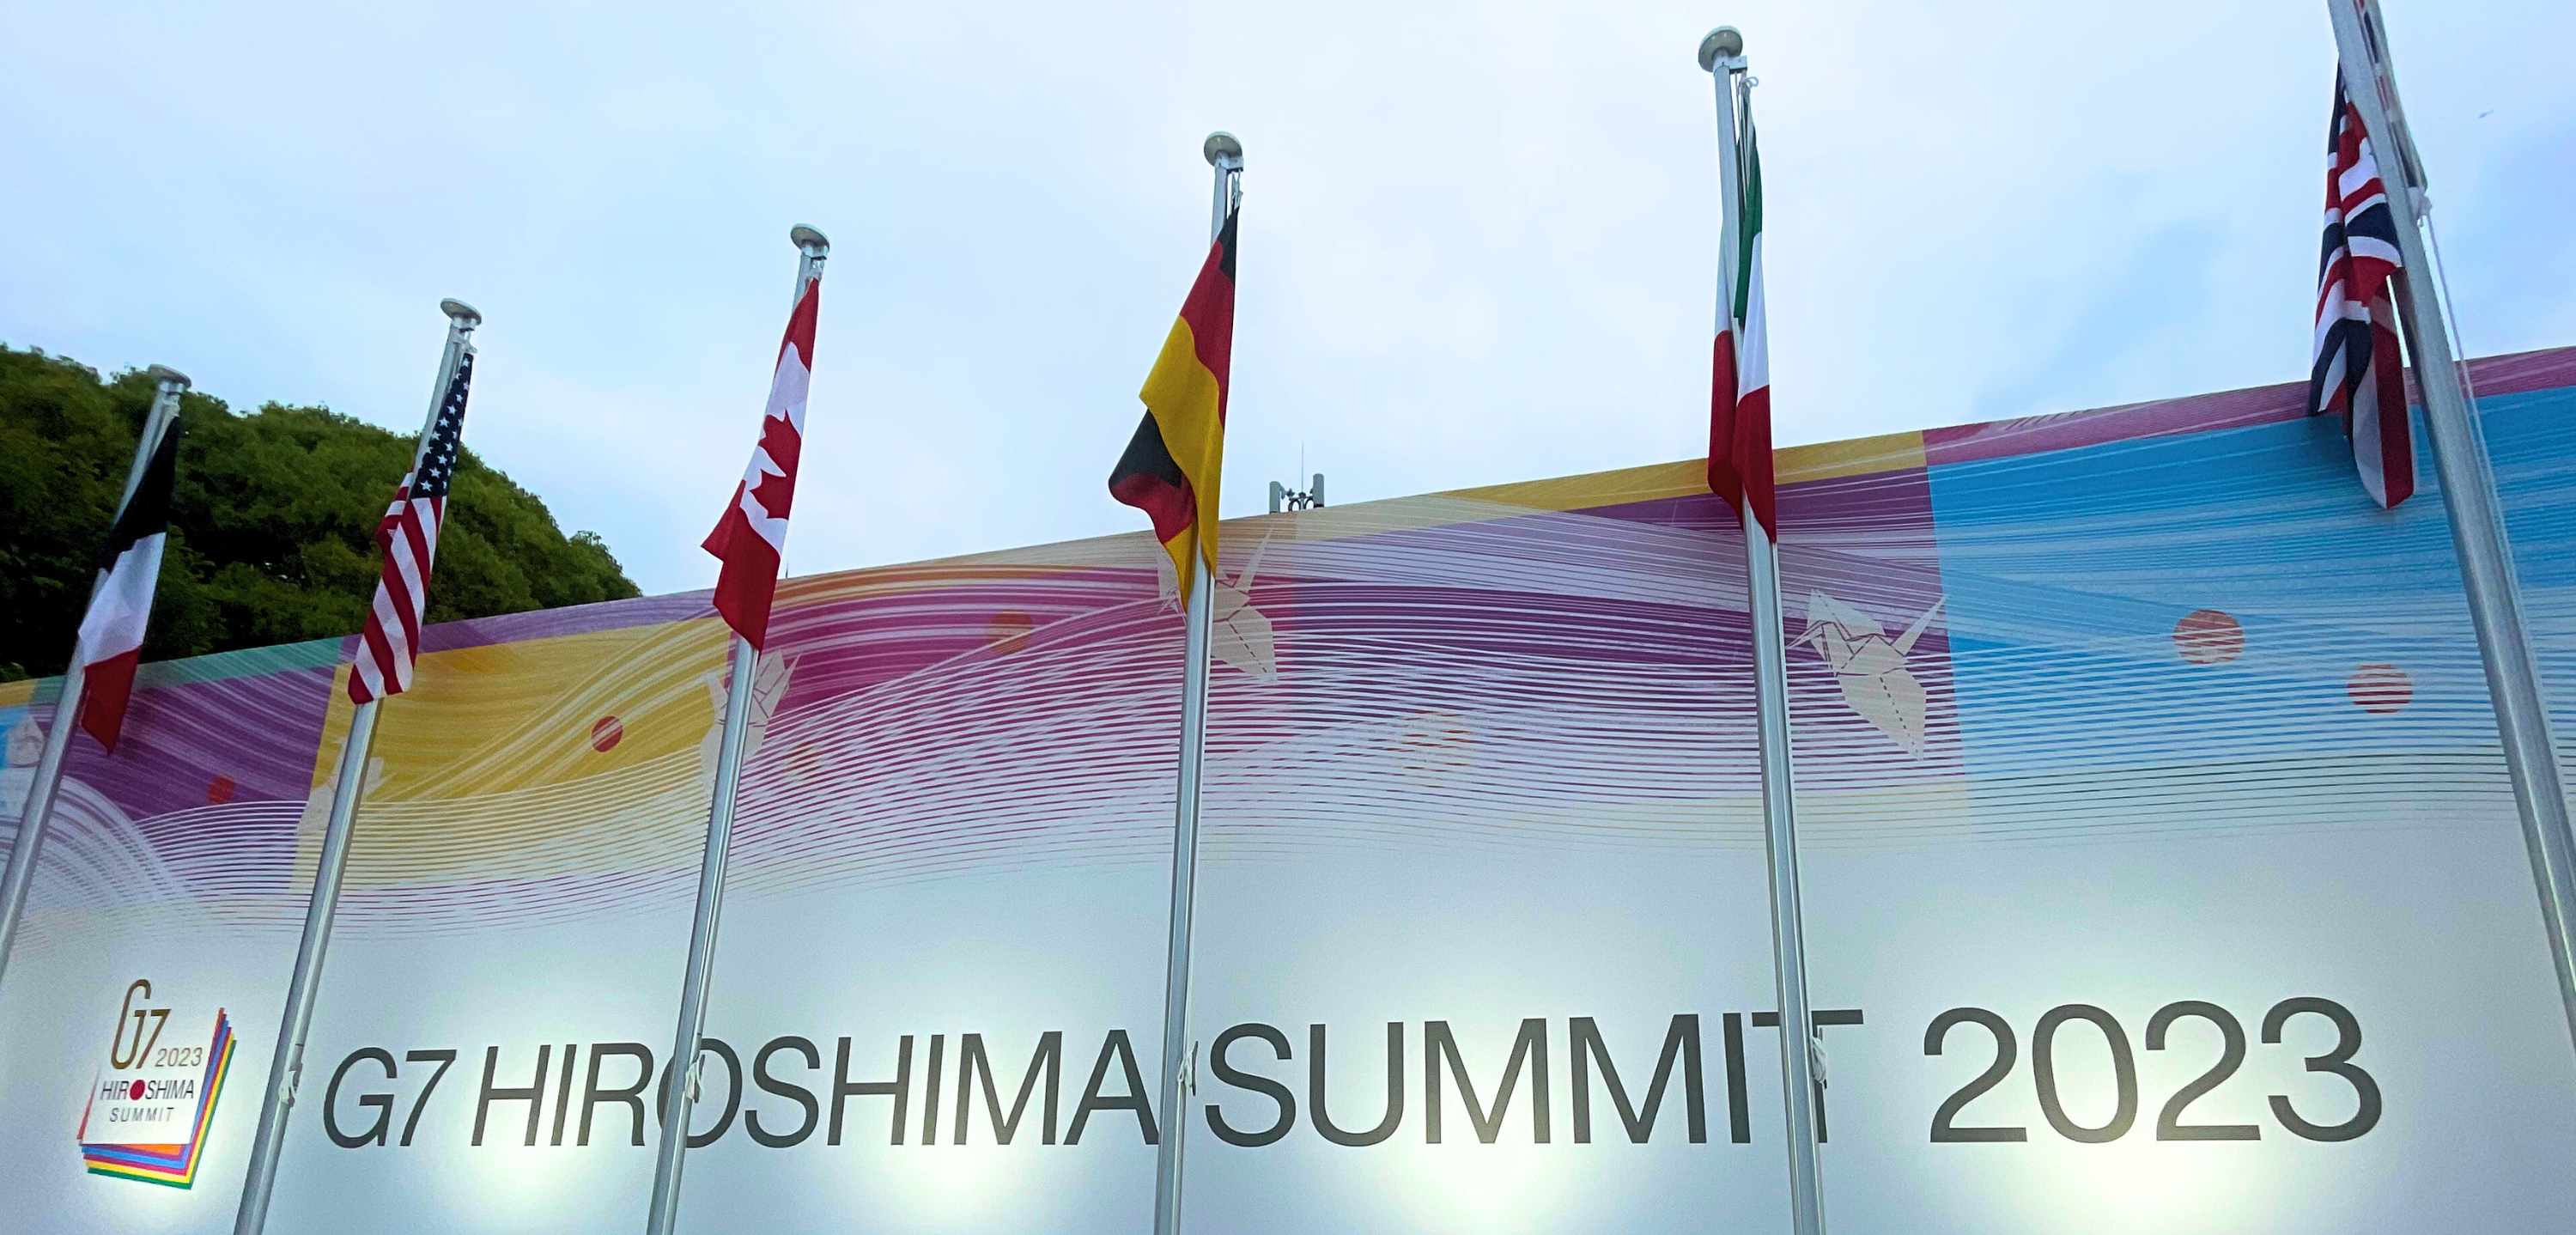 Flags of the G7 group are on tall flagpoles in front of a large display that says G 7 Summit Hiroshima 2023